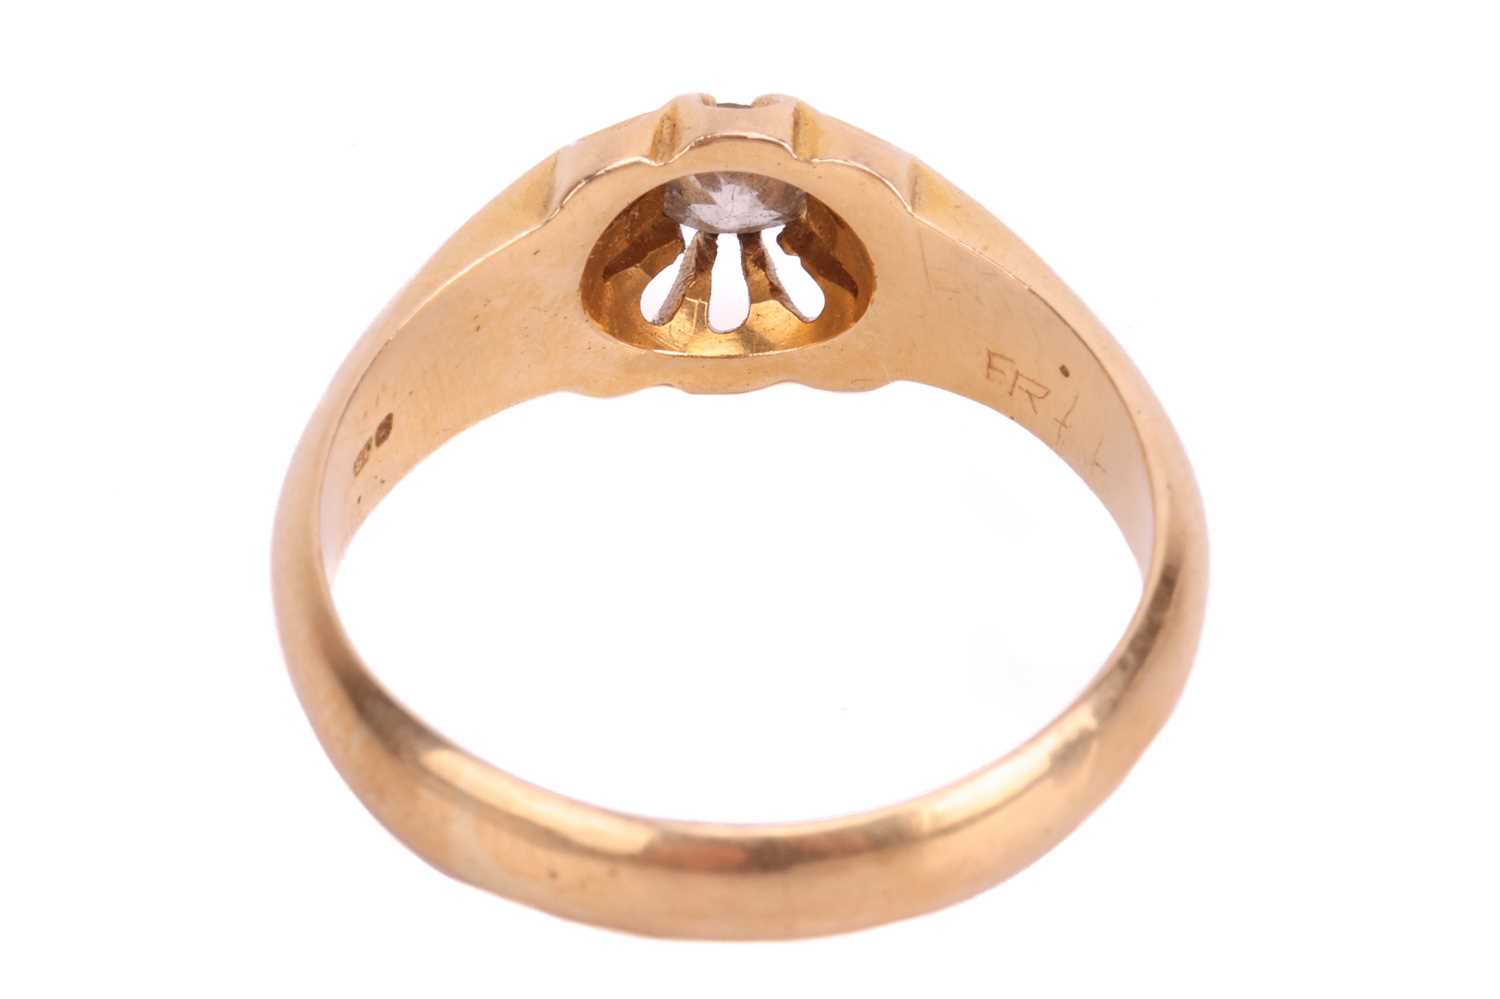 An Edwardian diamond belcher ring in 18ct gold, comprising an old-cut diamond of 4.2 x 4.0 x 2.4 mm, - Image 4 of 4